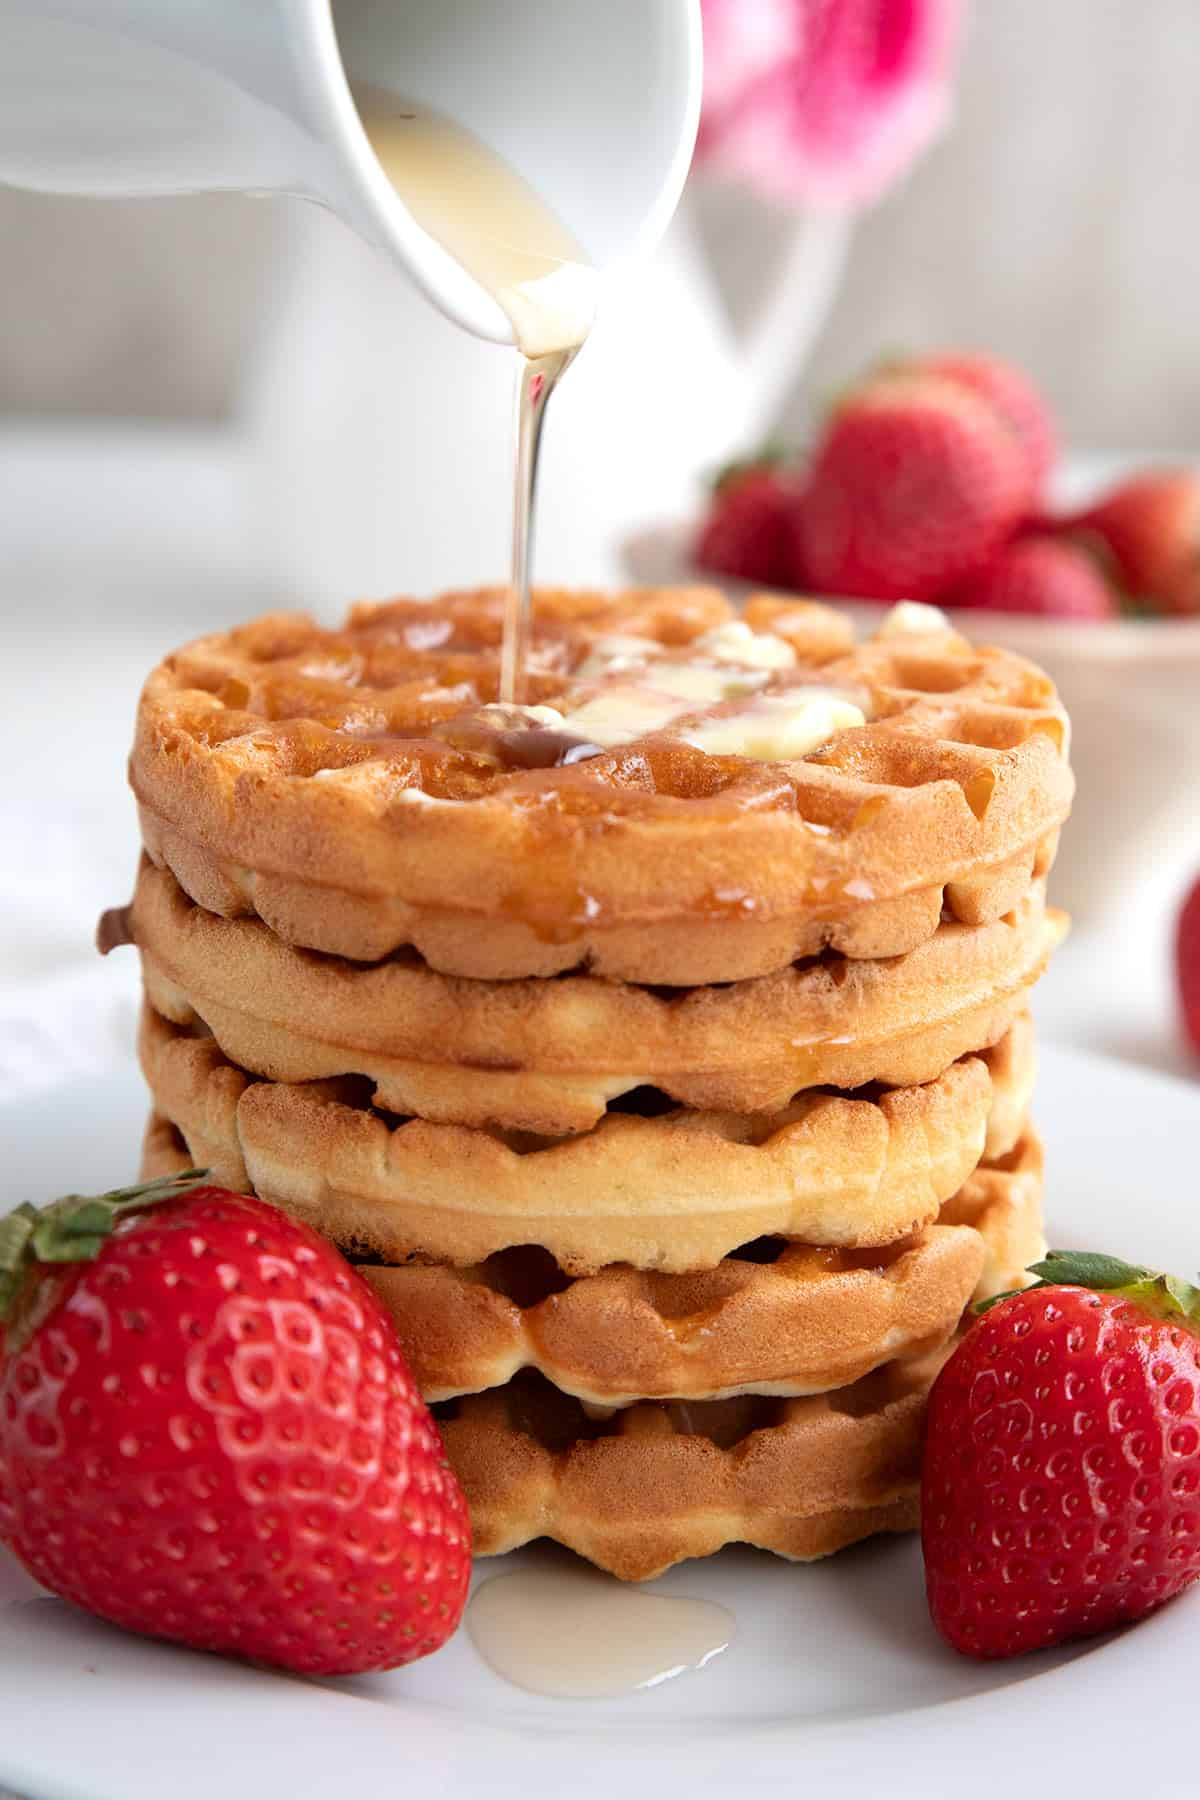 Syrup being drizzled over stack of keto waffles on a white plate with strawberries.